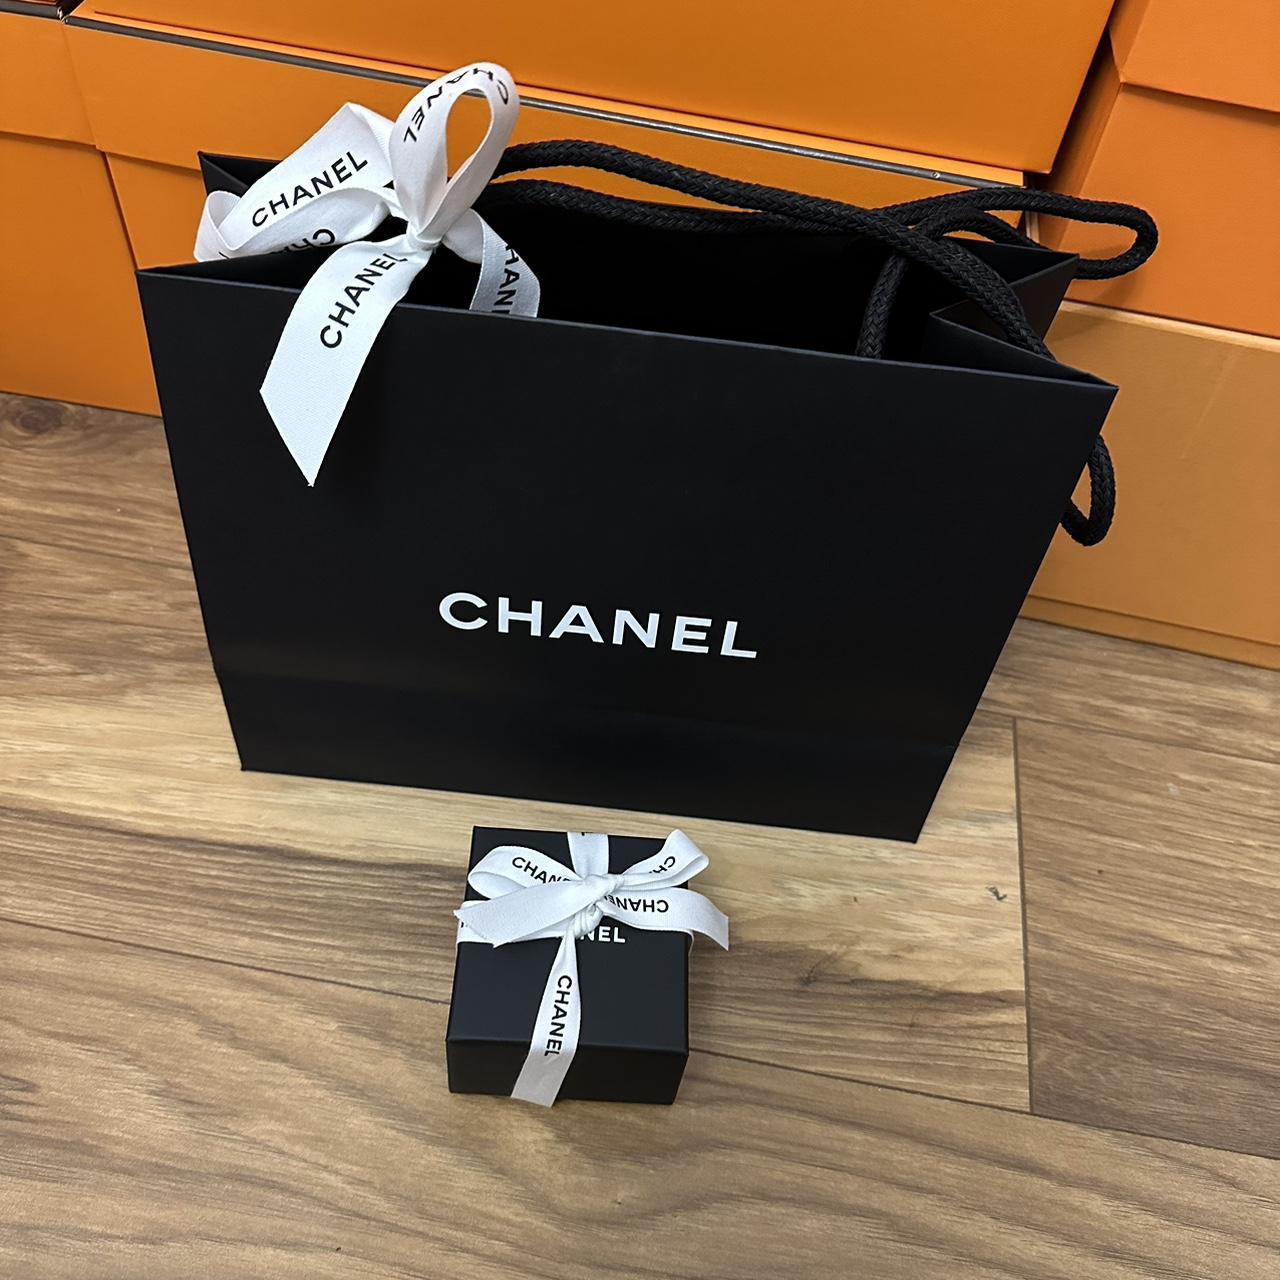 Chanel gifts bag . Size 5.5x4.4x2. Included - Depop